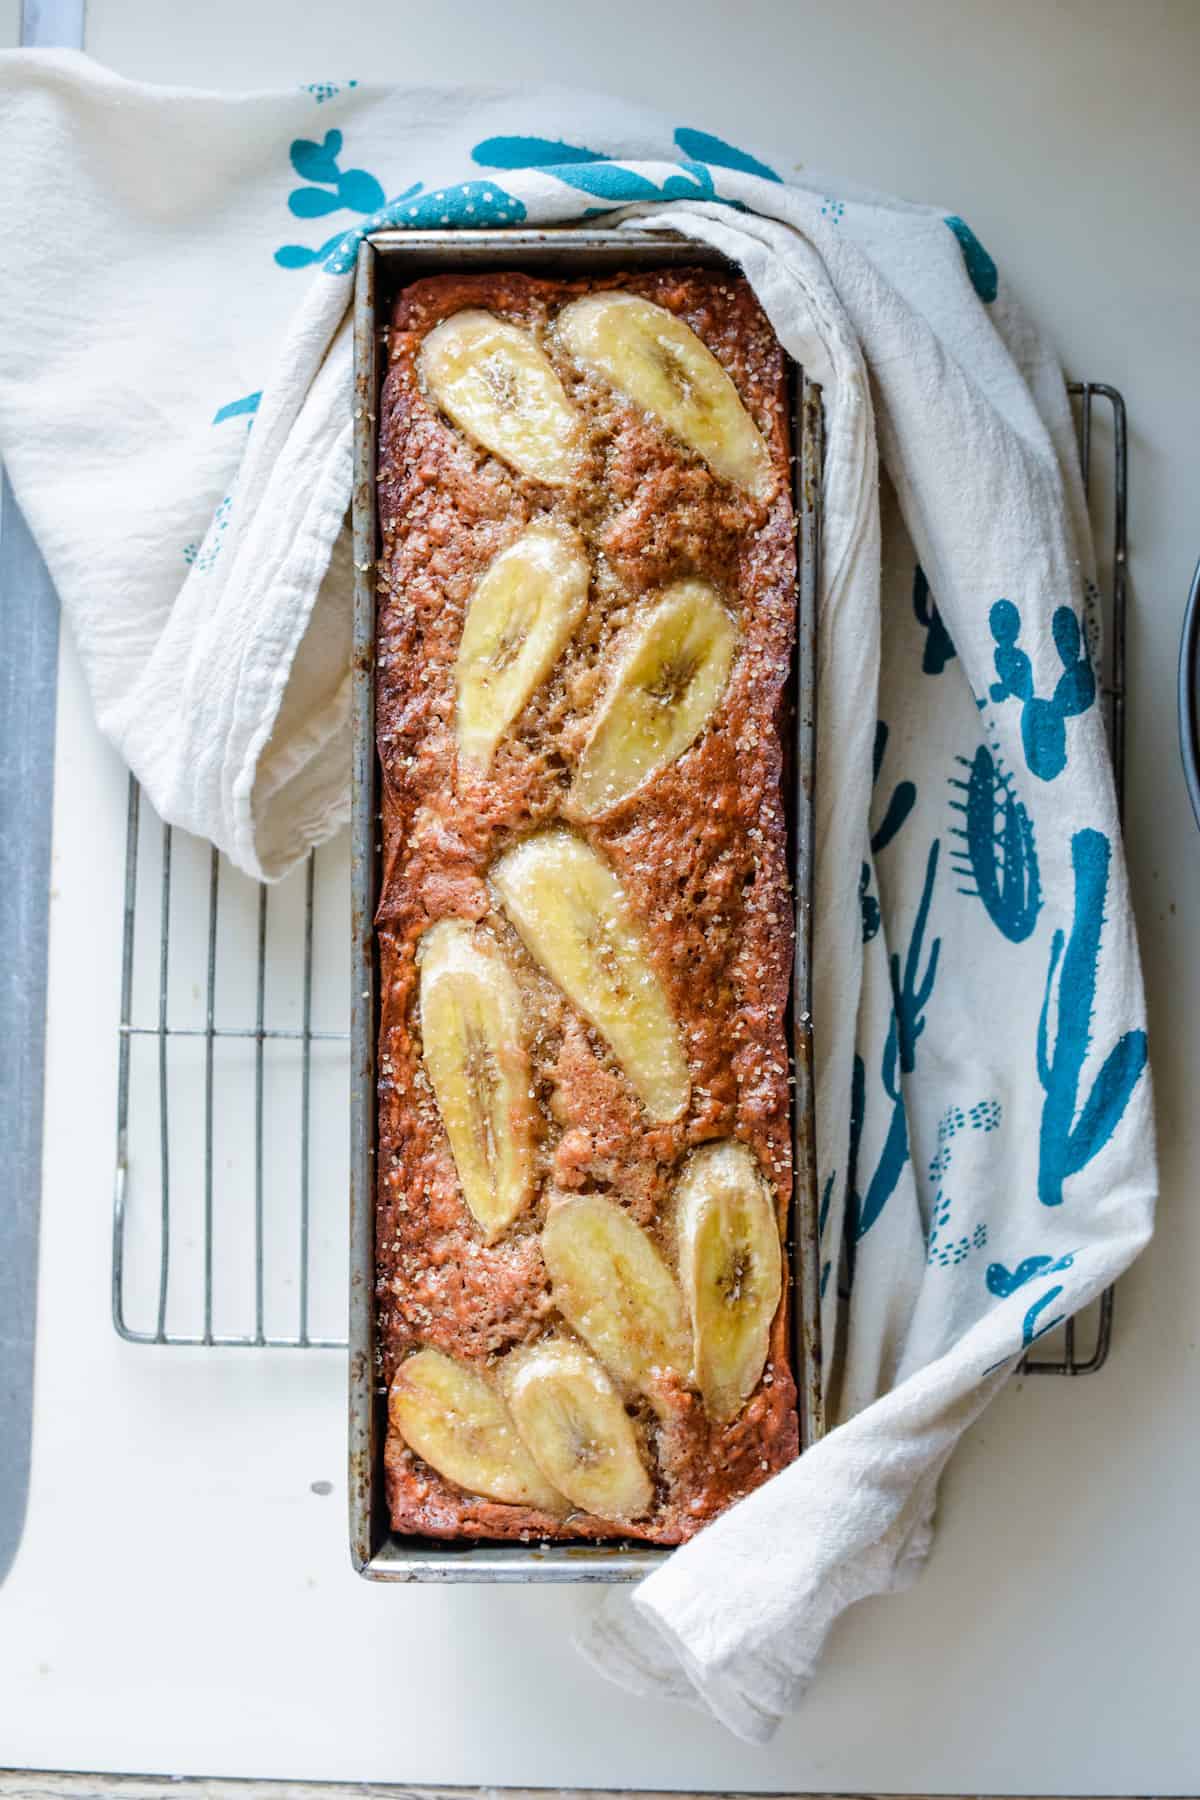 There are a mountain of banana bread recipes out there, but this Molasses Banana Bread with it's dark, caramel undertones, is the only one I make. Click now for this one-bowl, dairy-free banana bread recipe. #bananabread #easybananabread #molasses #dairyfreebananabread